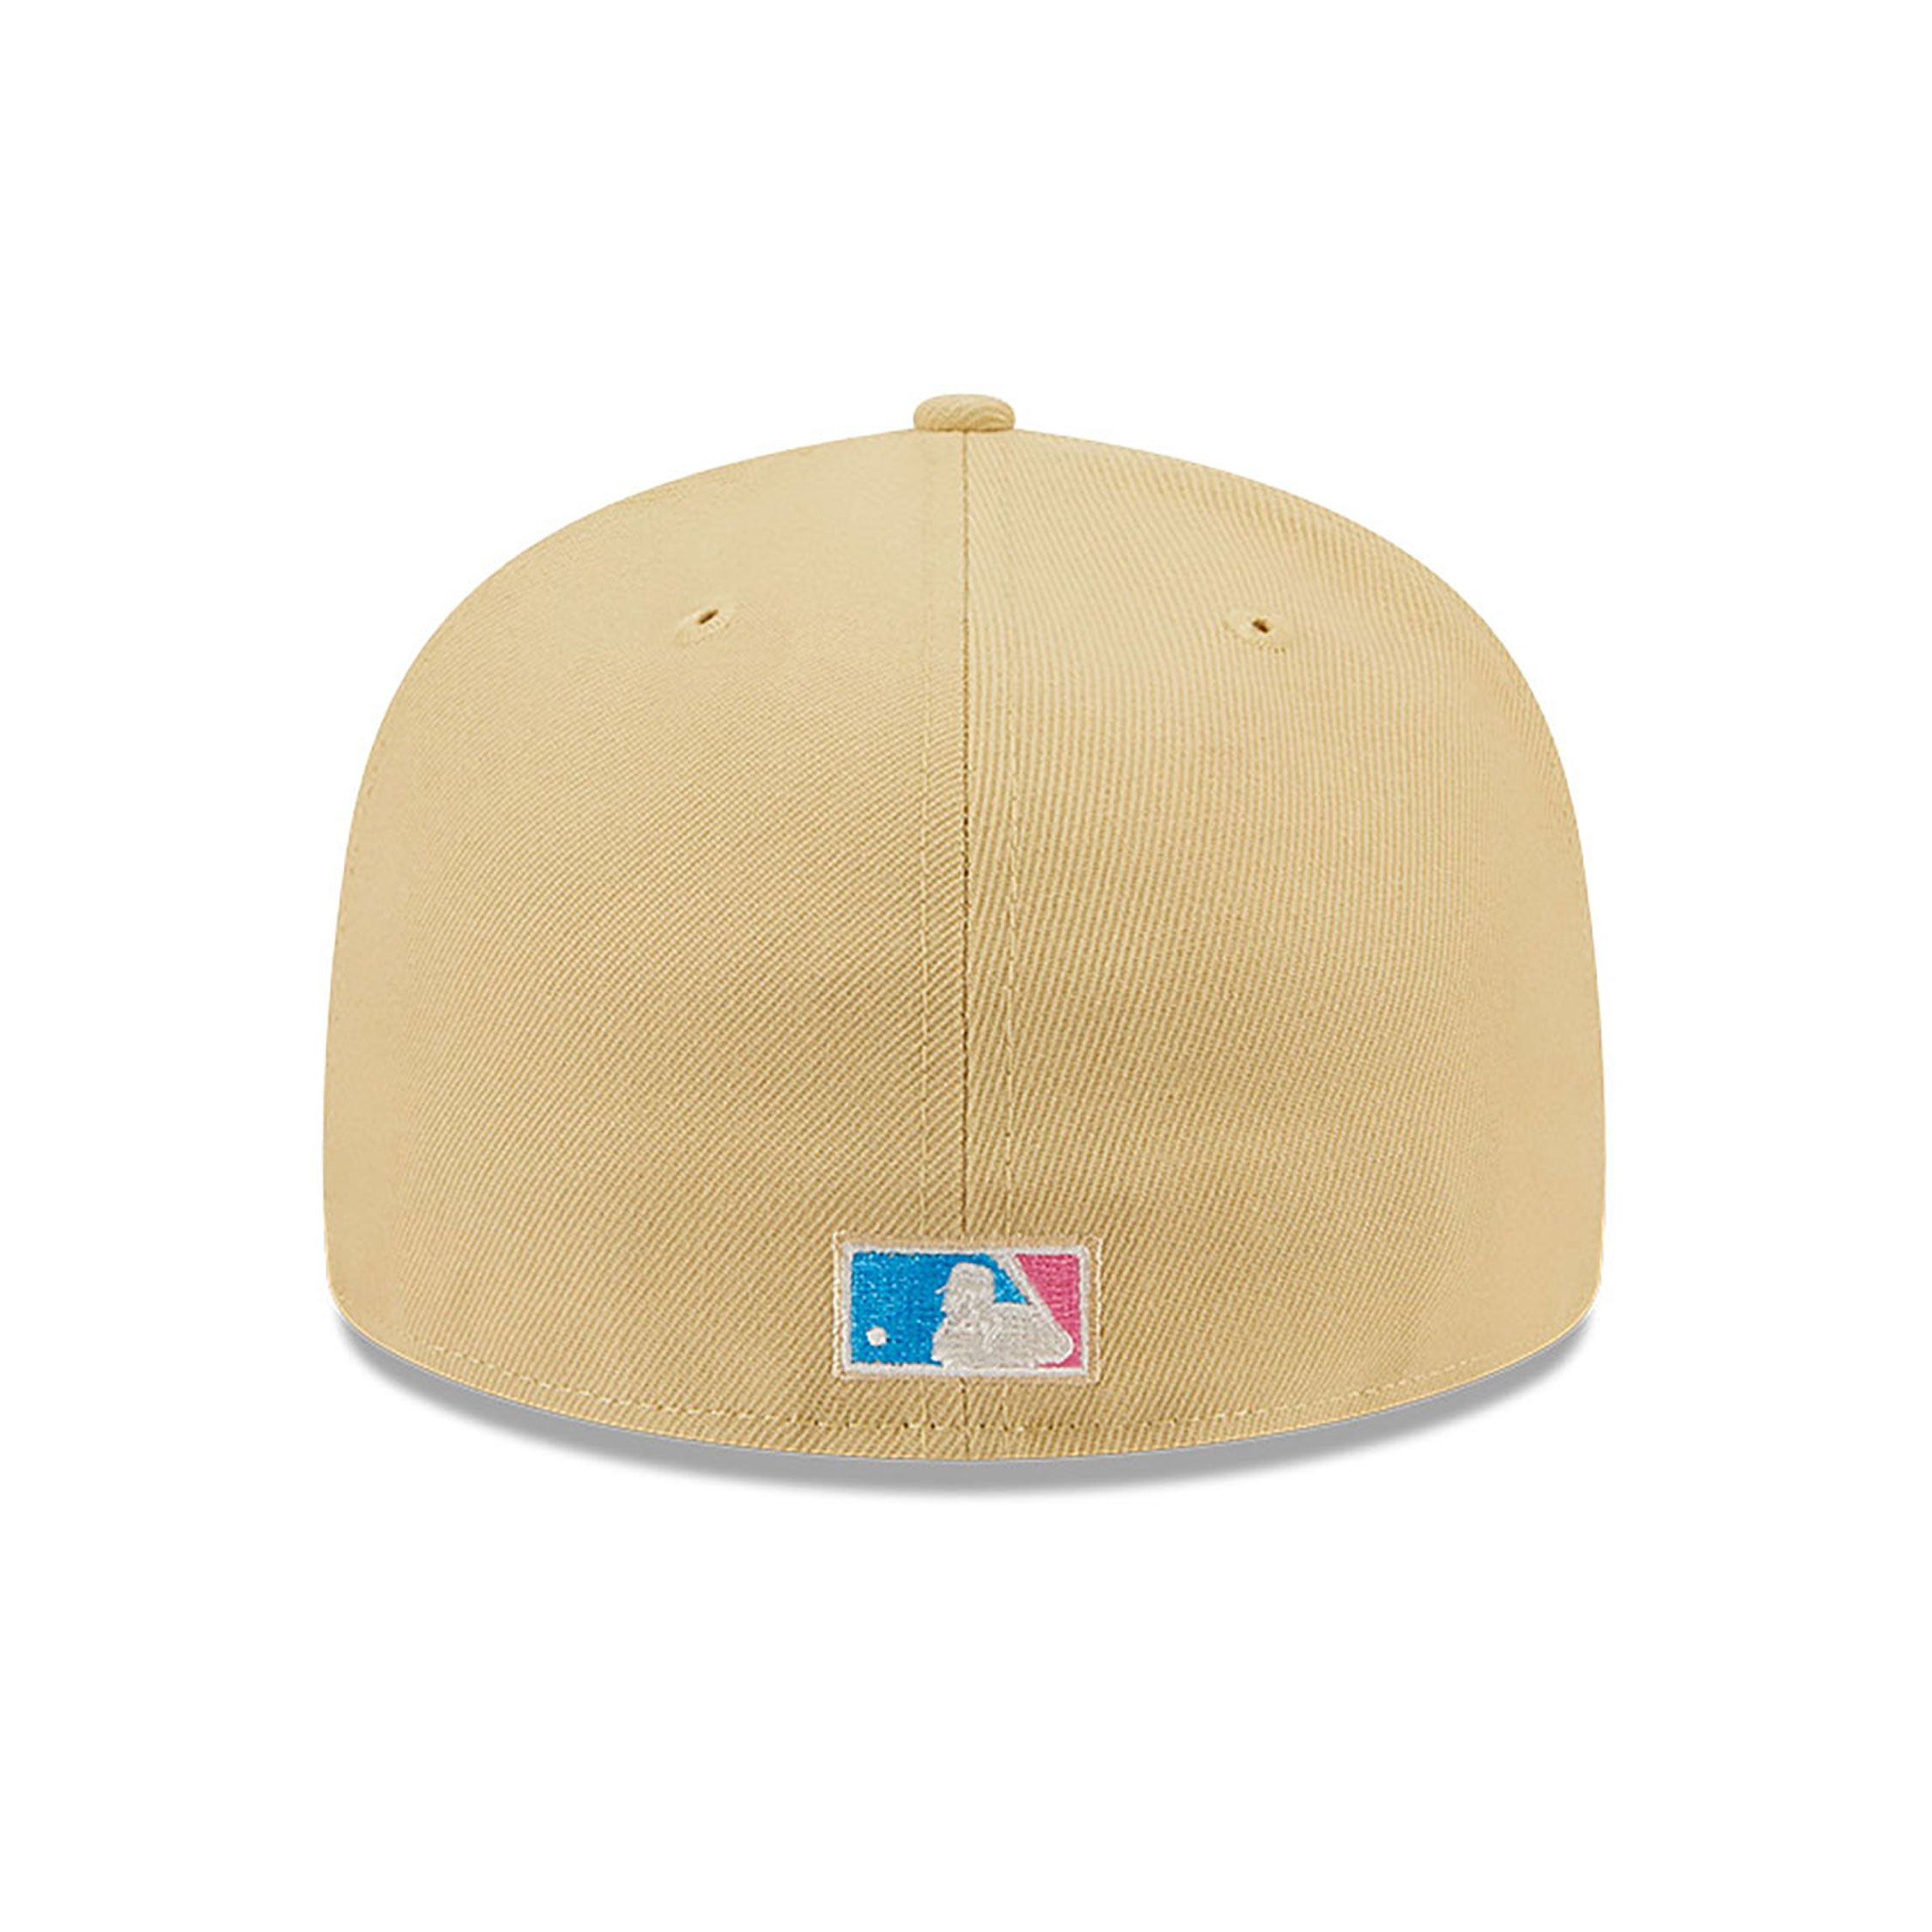 San Francisco Giants Seam Stitch Beige 59FIFTY Fitted Cap